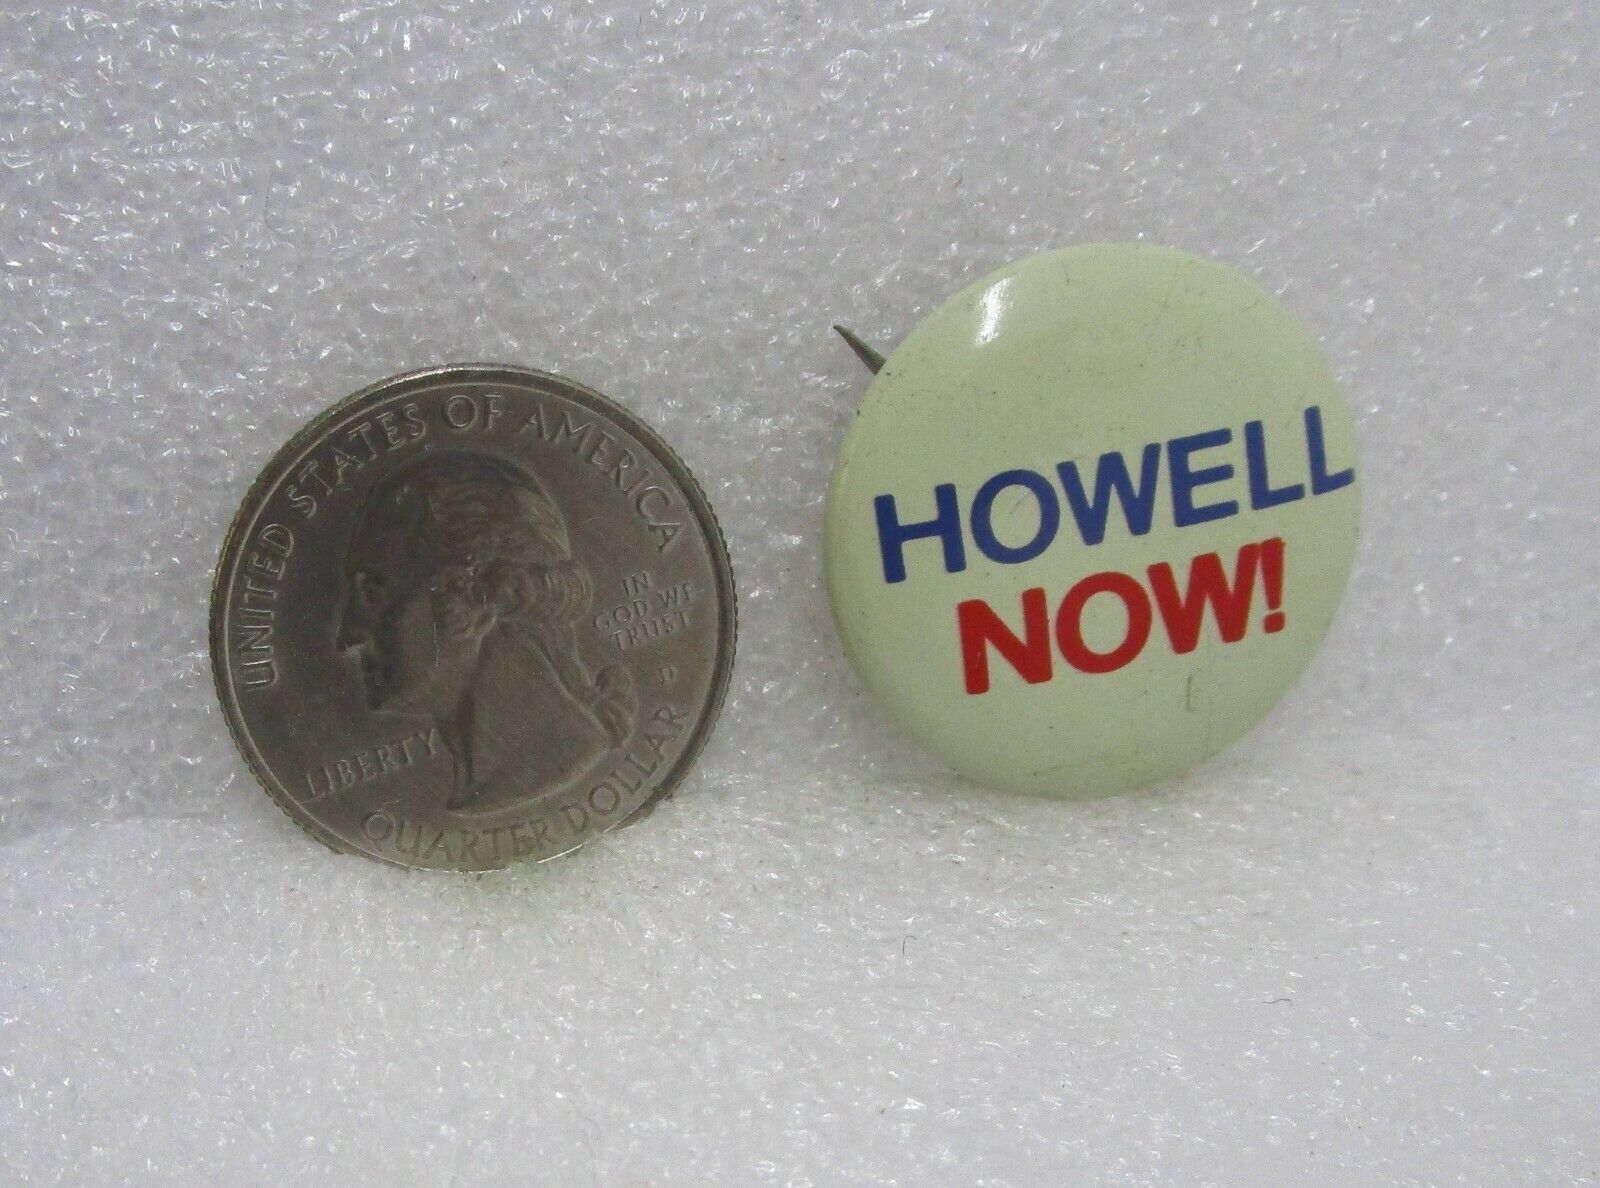 Henry Howell - Howell Now Button Pin